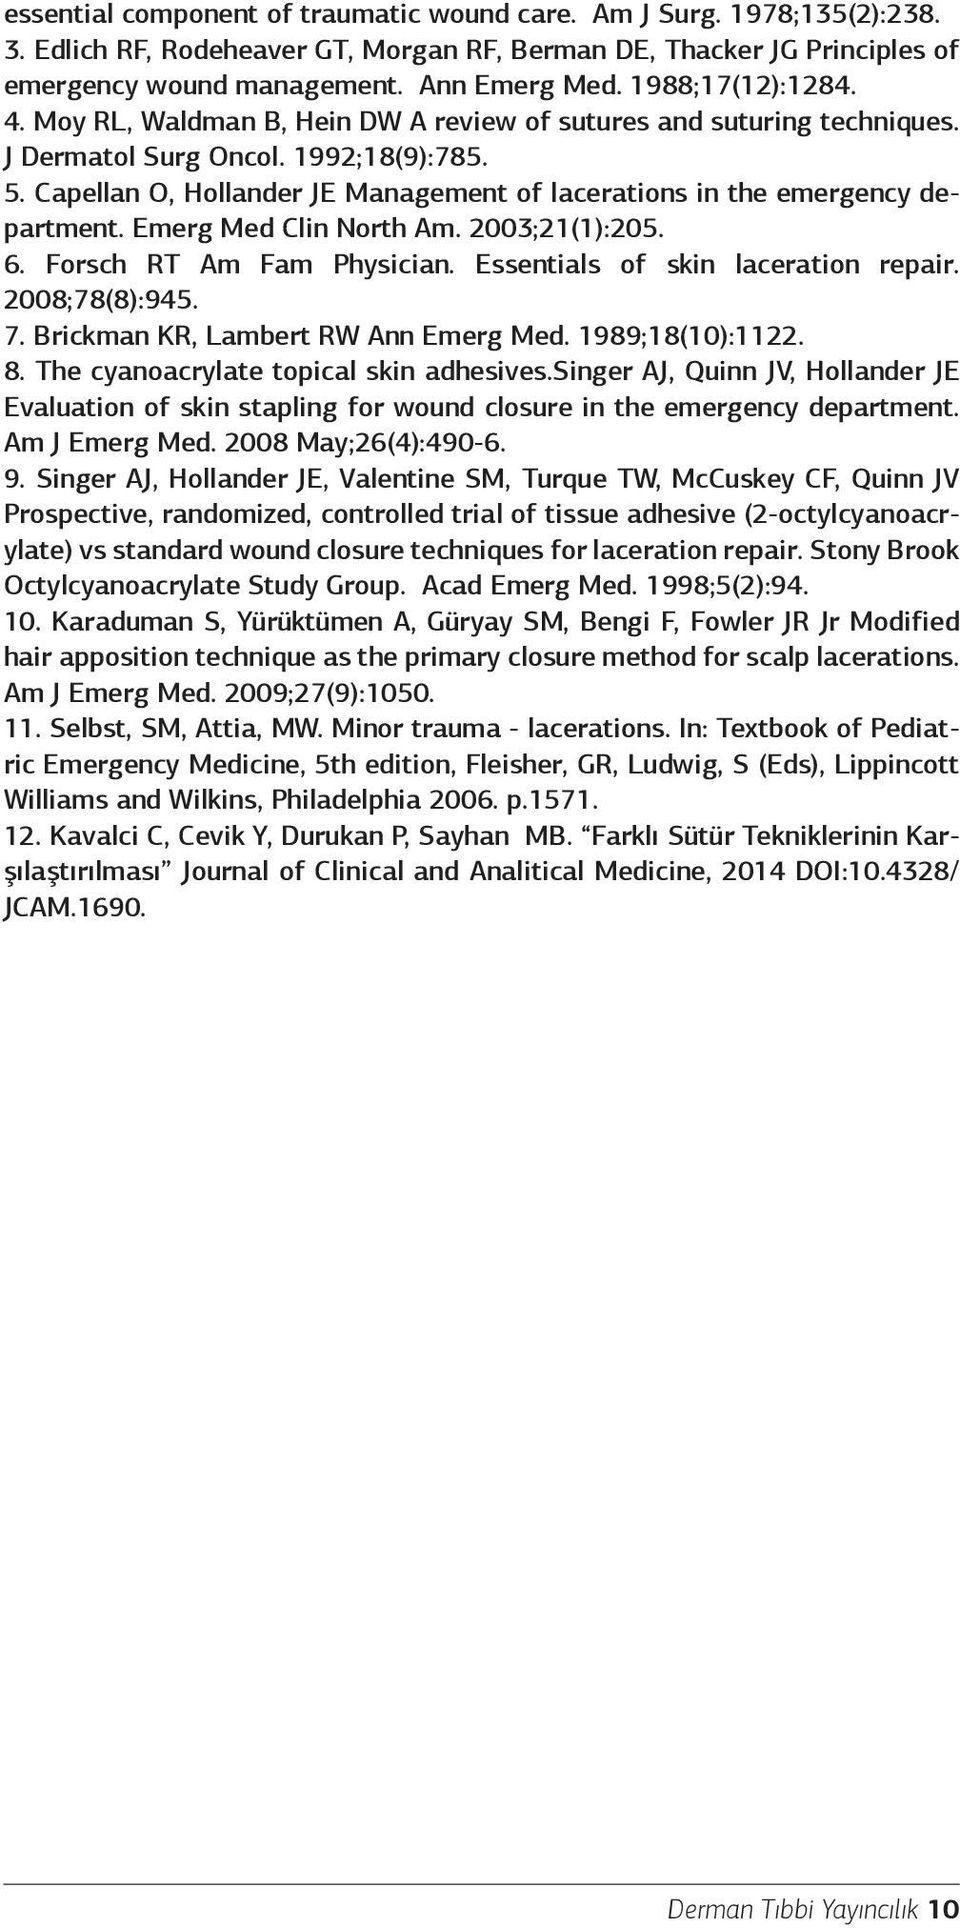 Capellan O, Hollander JE Management of lacerations in the emergency department. Emerg Med Clin North Am. 2003;21(1):205. 6. Forsch RT Am Fam Physician. Essentials of skin laceration repair.